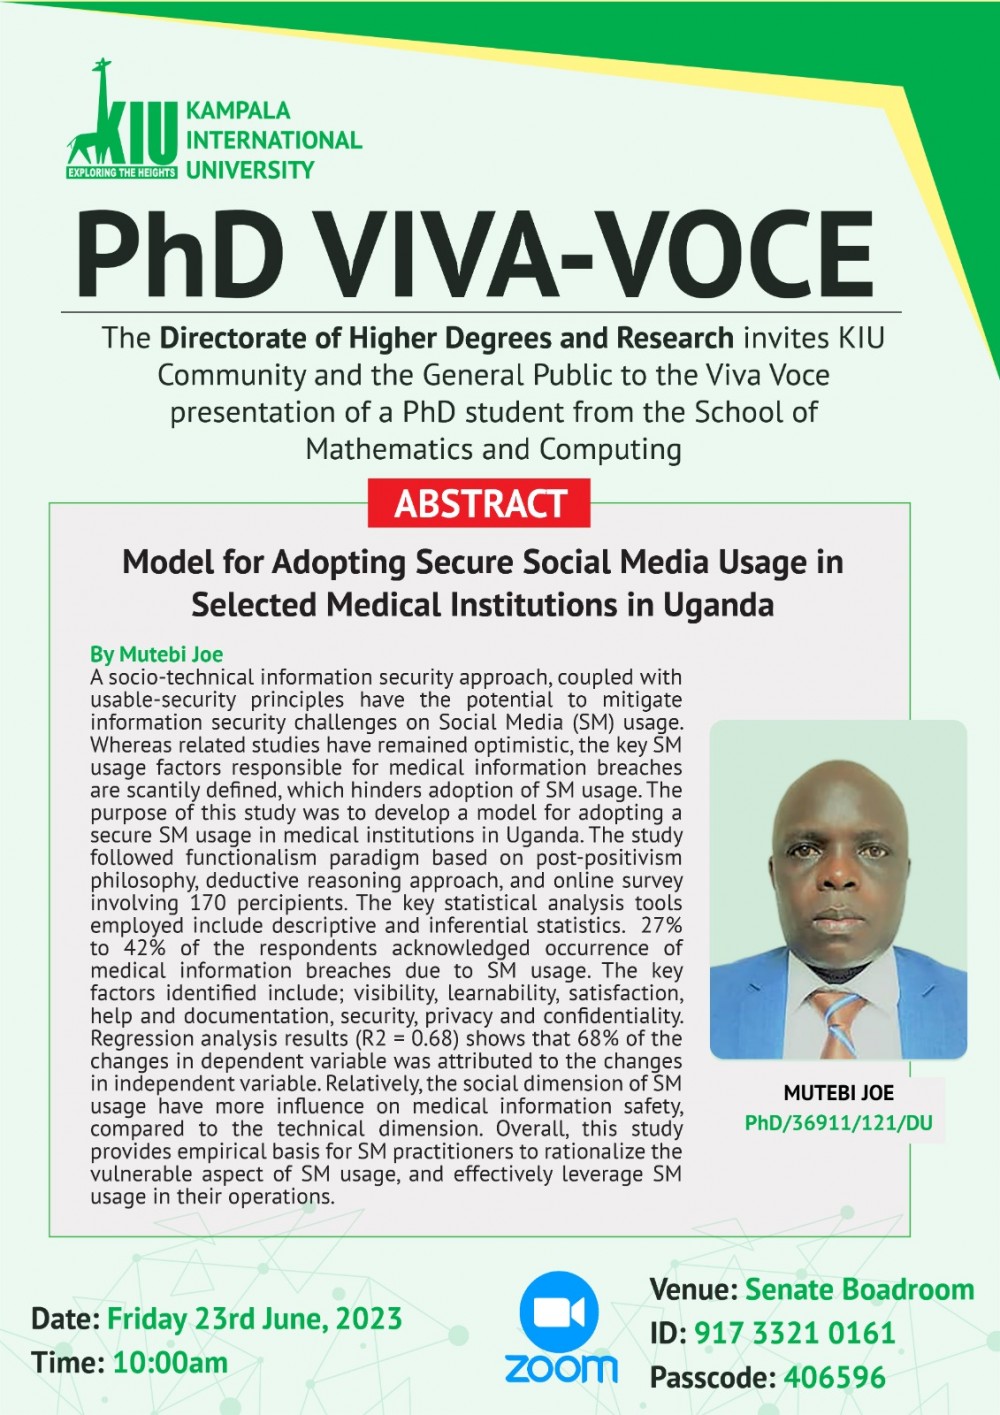 directorate-of-higher-degrees-and-research-to-hold-phd-viva-voce-on-june-23rd-2023